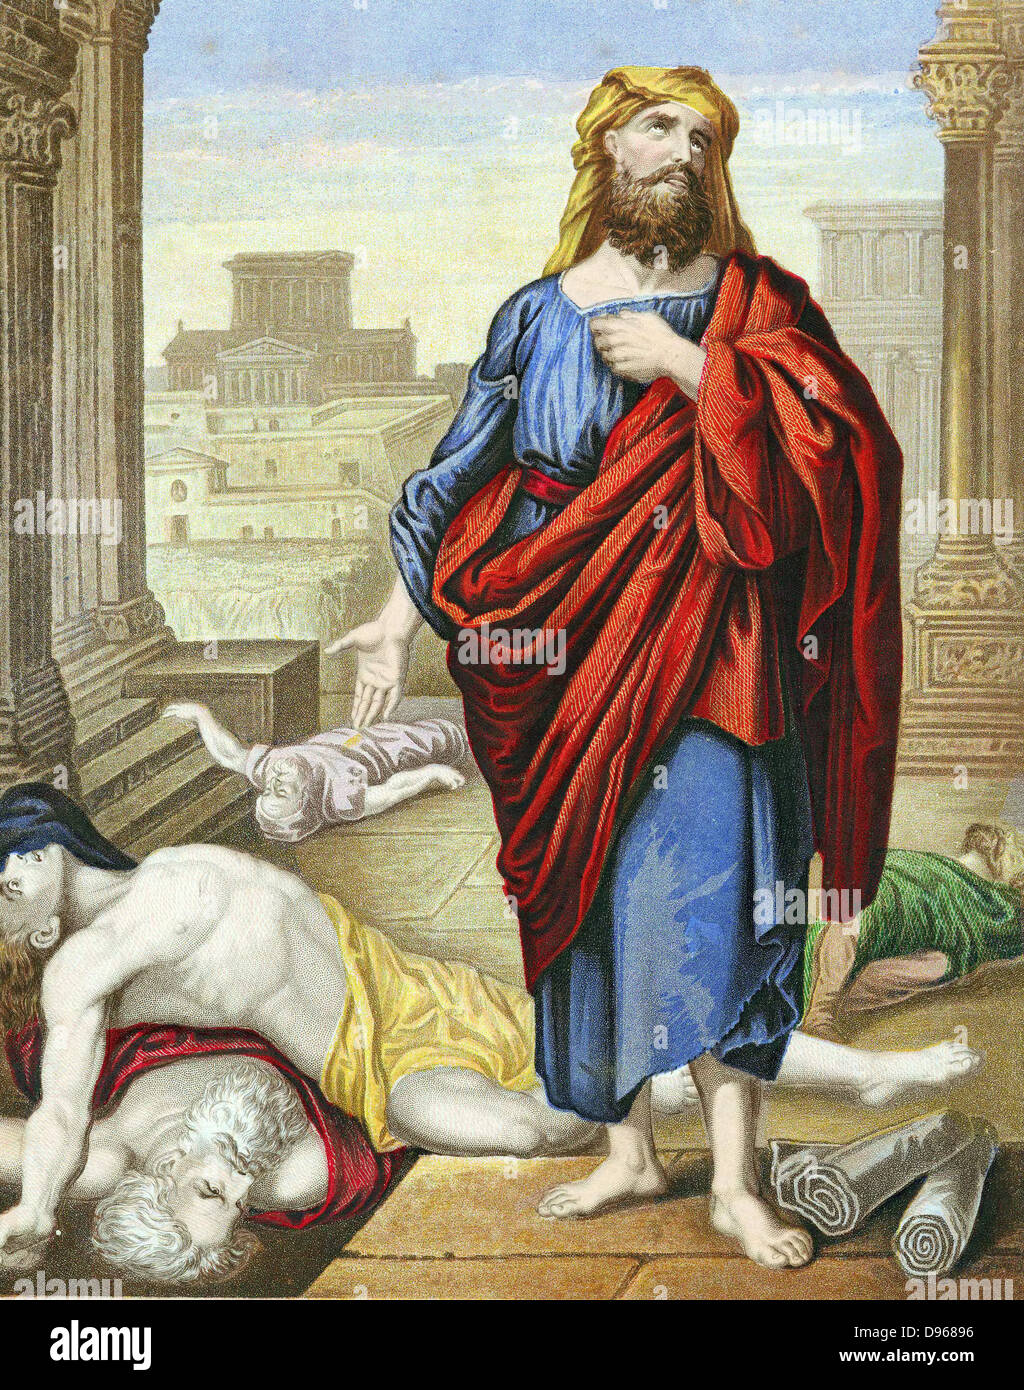 Jeremiah lamenting over the misery of Jerusalem. 'Bible': Lamentations 2.  7th century BC Old Testament prophet. Warned of fall of Jerusalem to Nebuchadrezzar (Nebuchadnezzar) and exile in Babylon. Foretold coming of Messiah. Chromolithograph c1860 Stock Photo